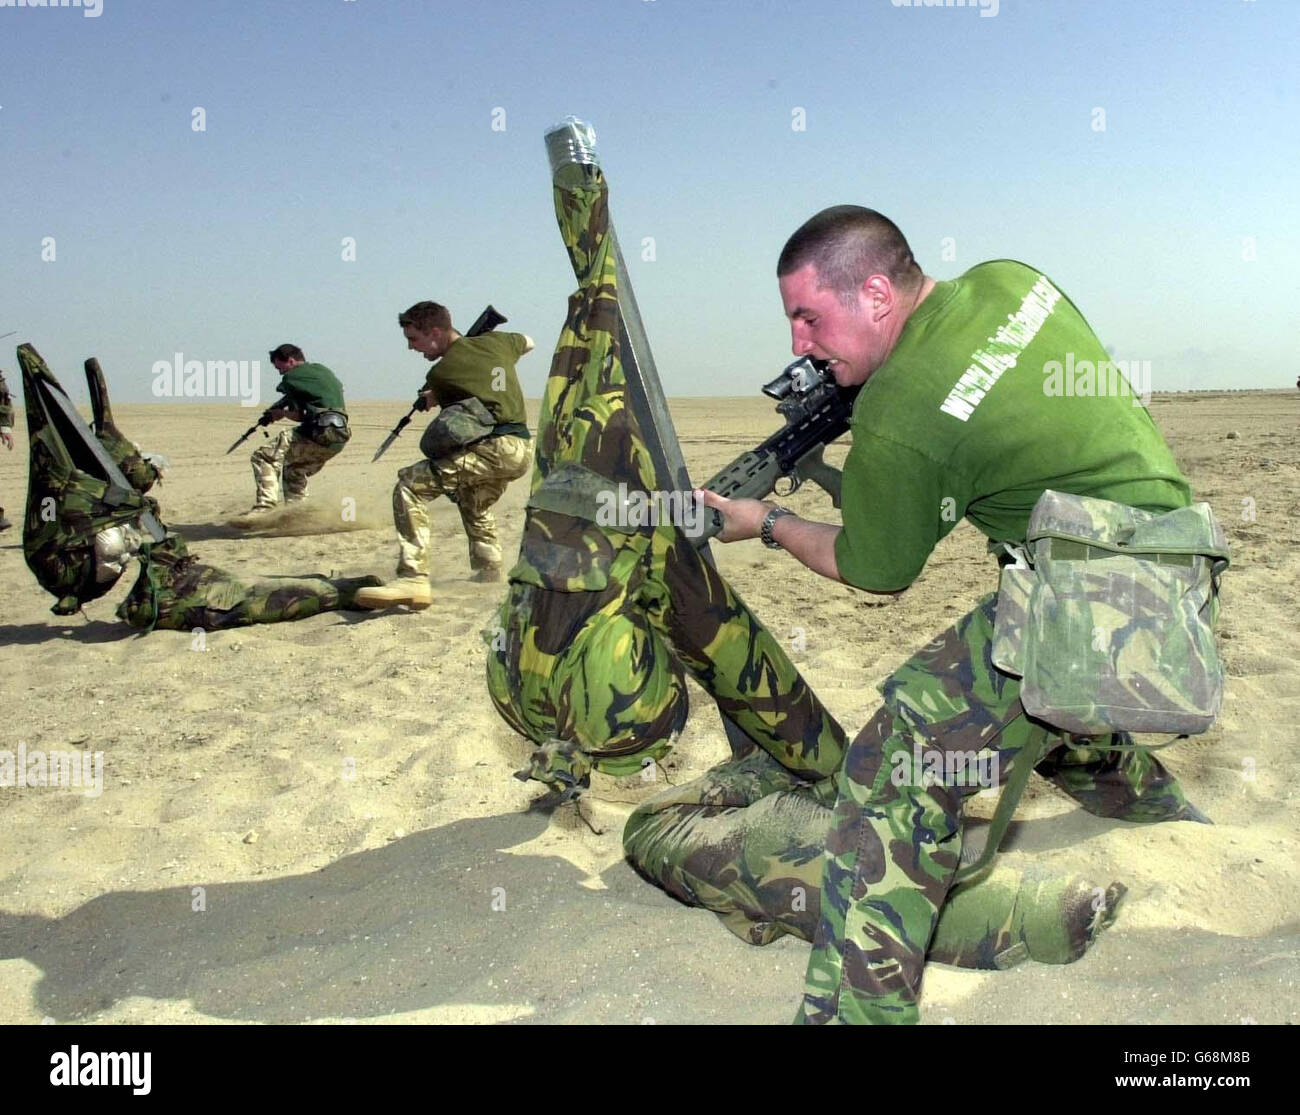 Private Michael Prosser ,19, from South Wales, of A company 1st Battalion Light Infantry 2 RTR battle group, practises close quarter fighting on the Iraq/Kuwait border. Stock Photo